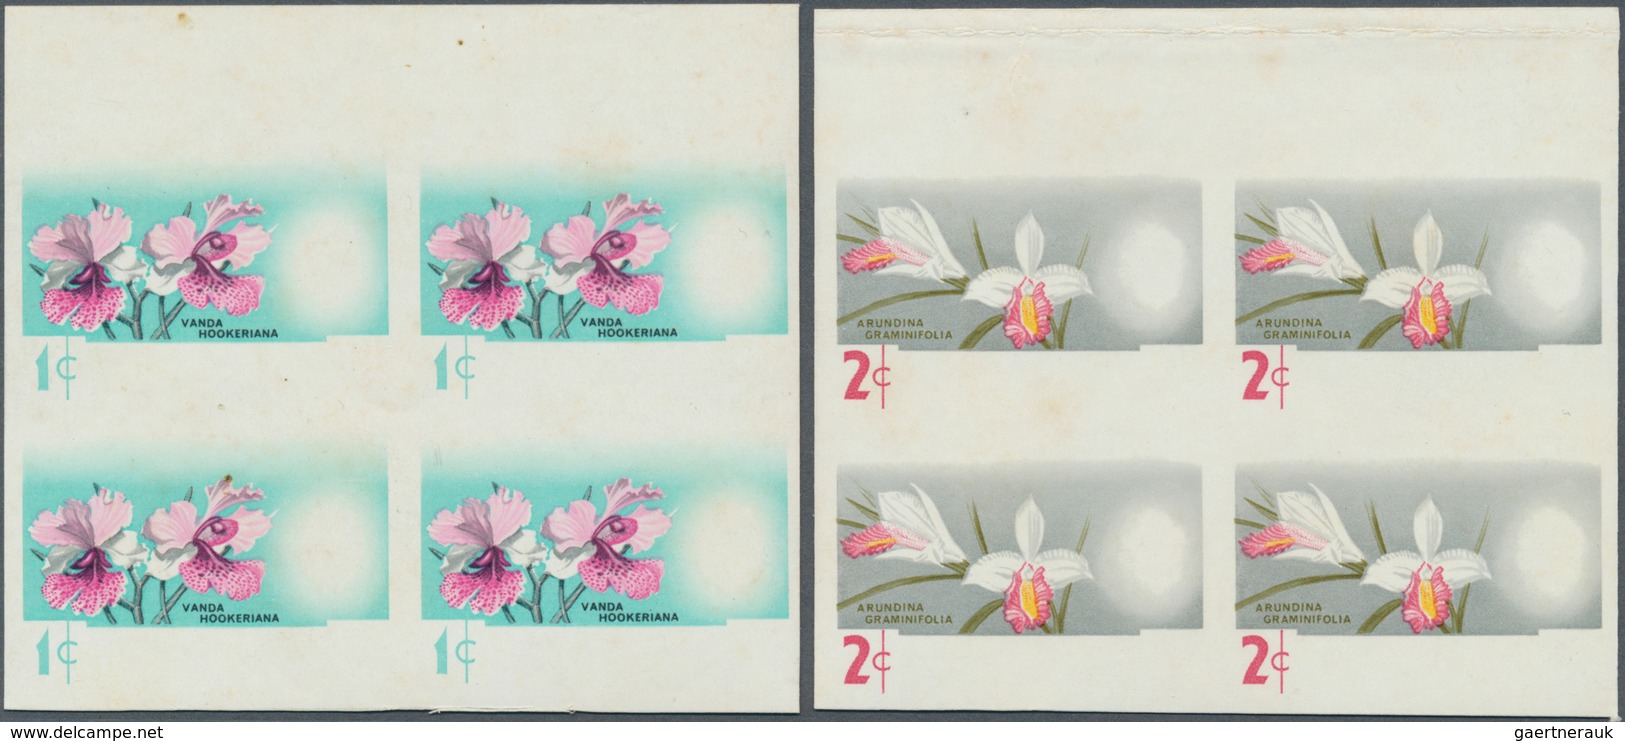 Malaysia: 1965, Orchids set of seven for the different Malayan States with BLACK OMITTED (country na